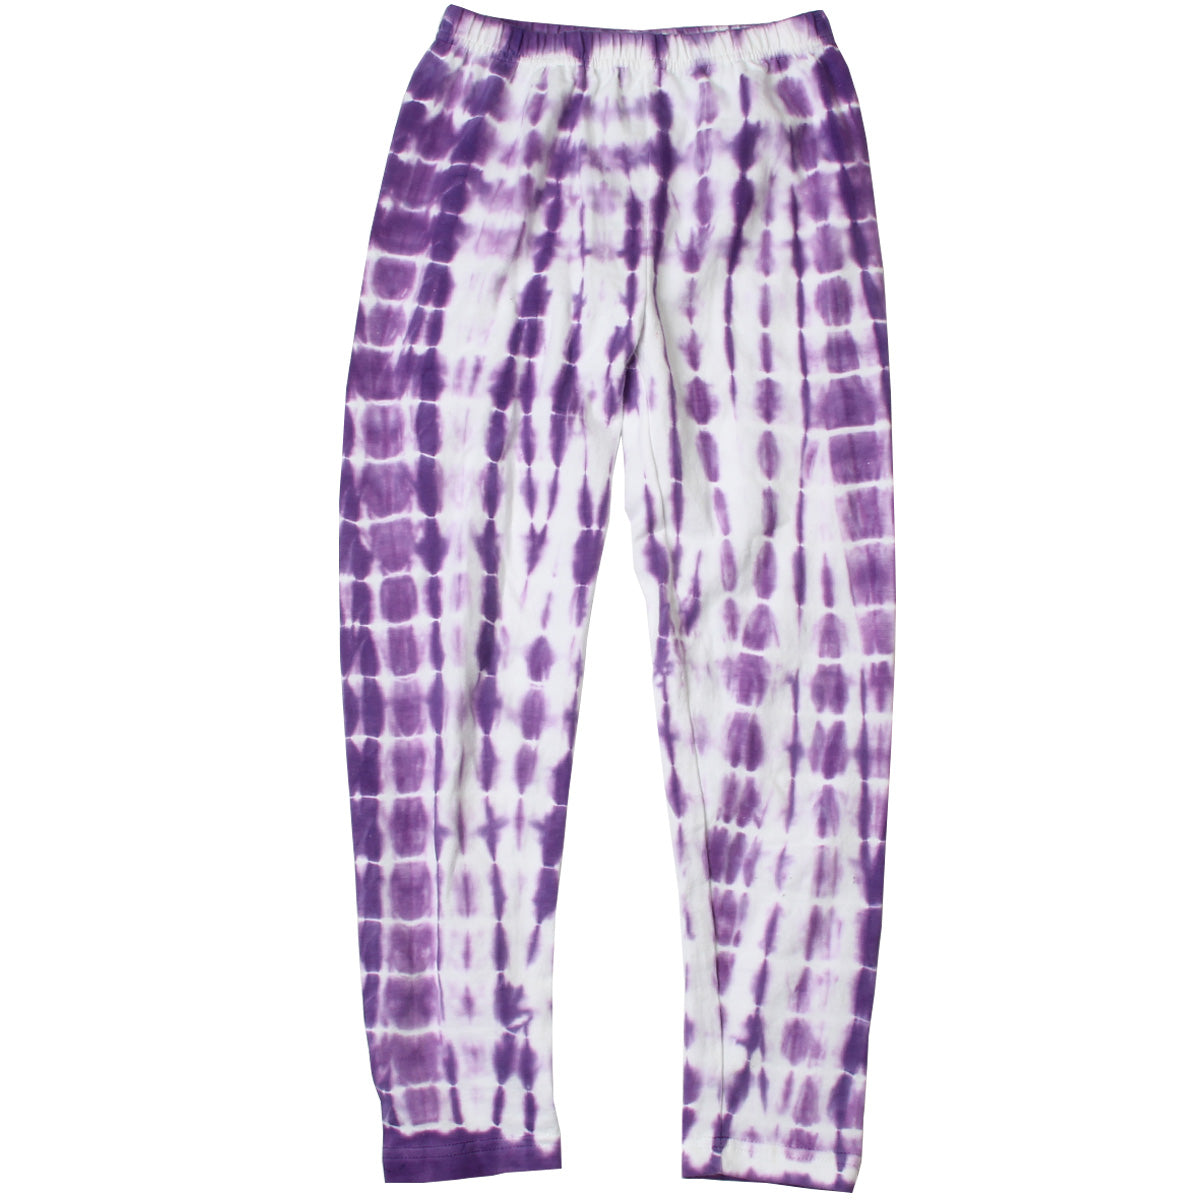 Wes and Willy Girl's Tie Dye Leggings - Grape